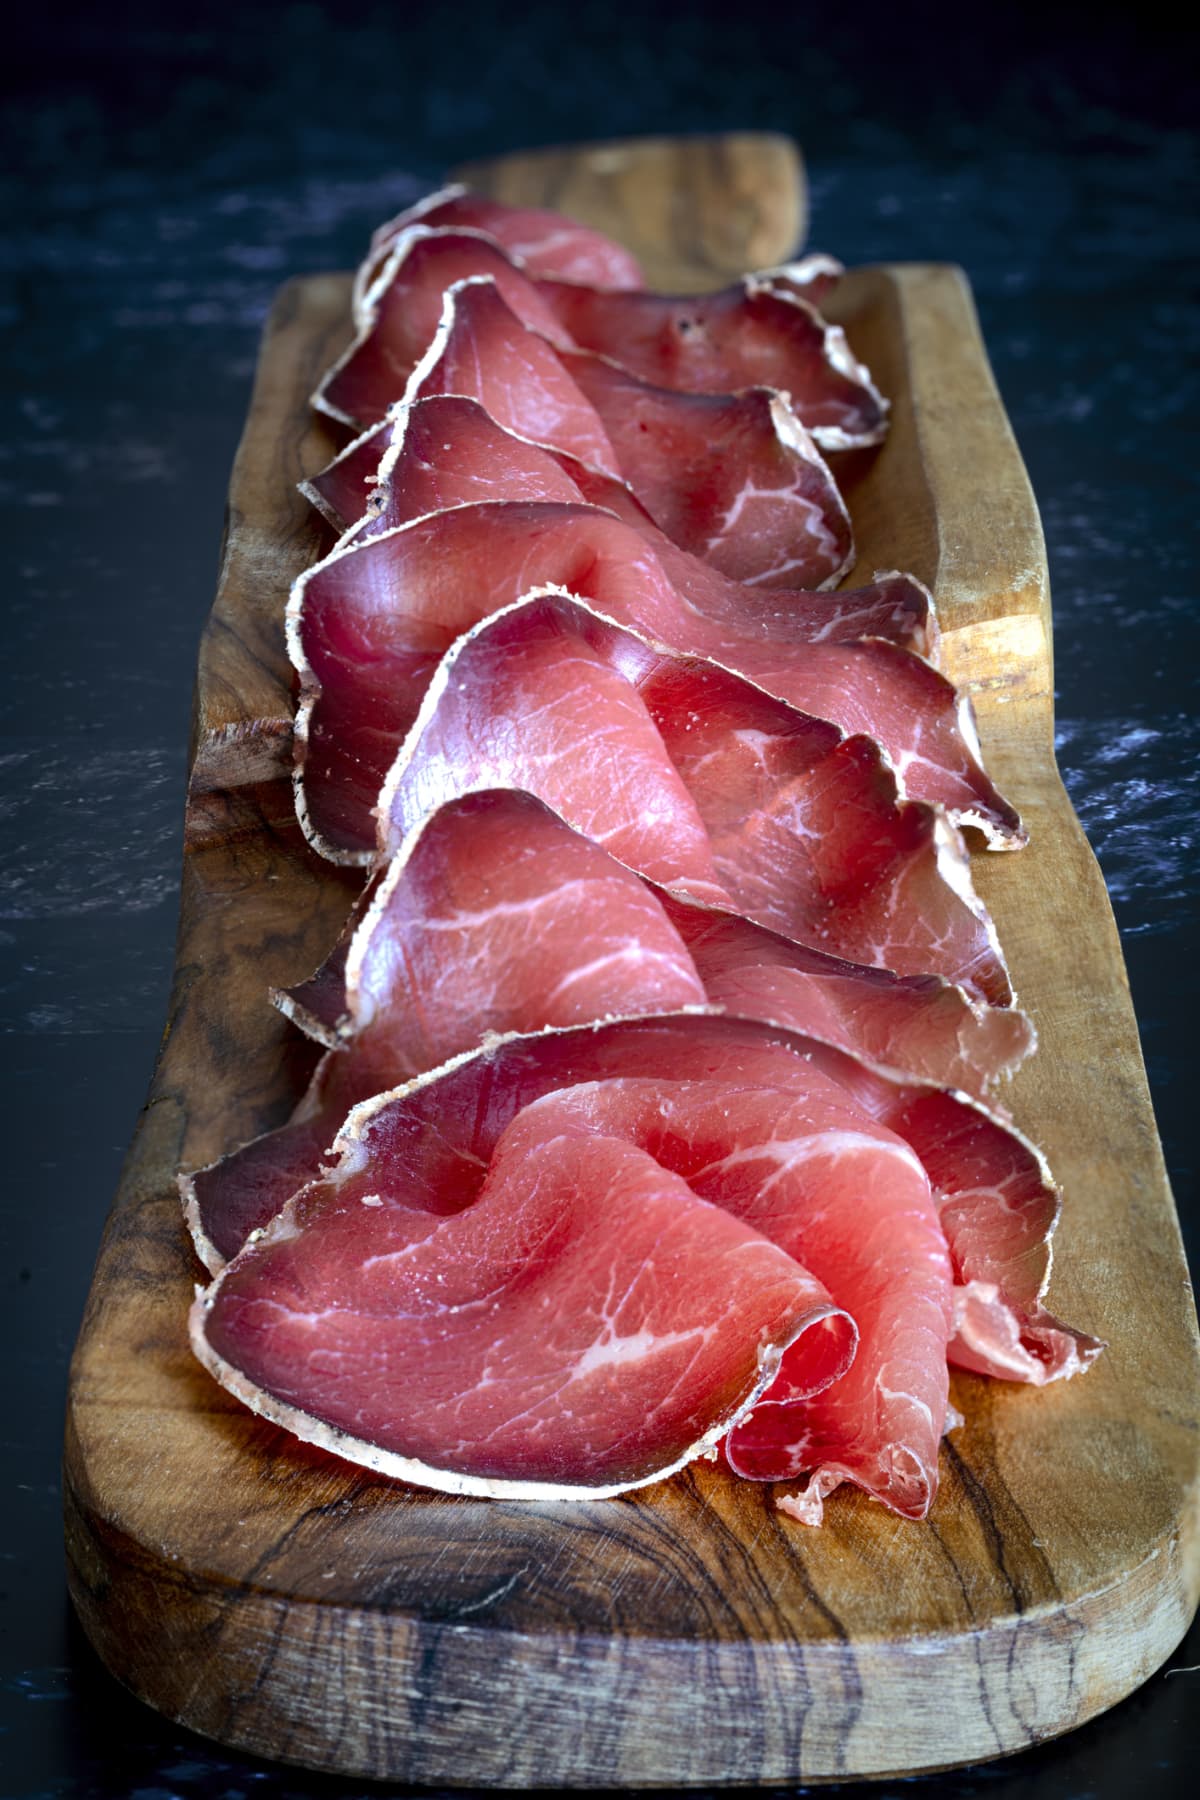 slices of cured meat on a wood cutting board